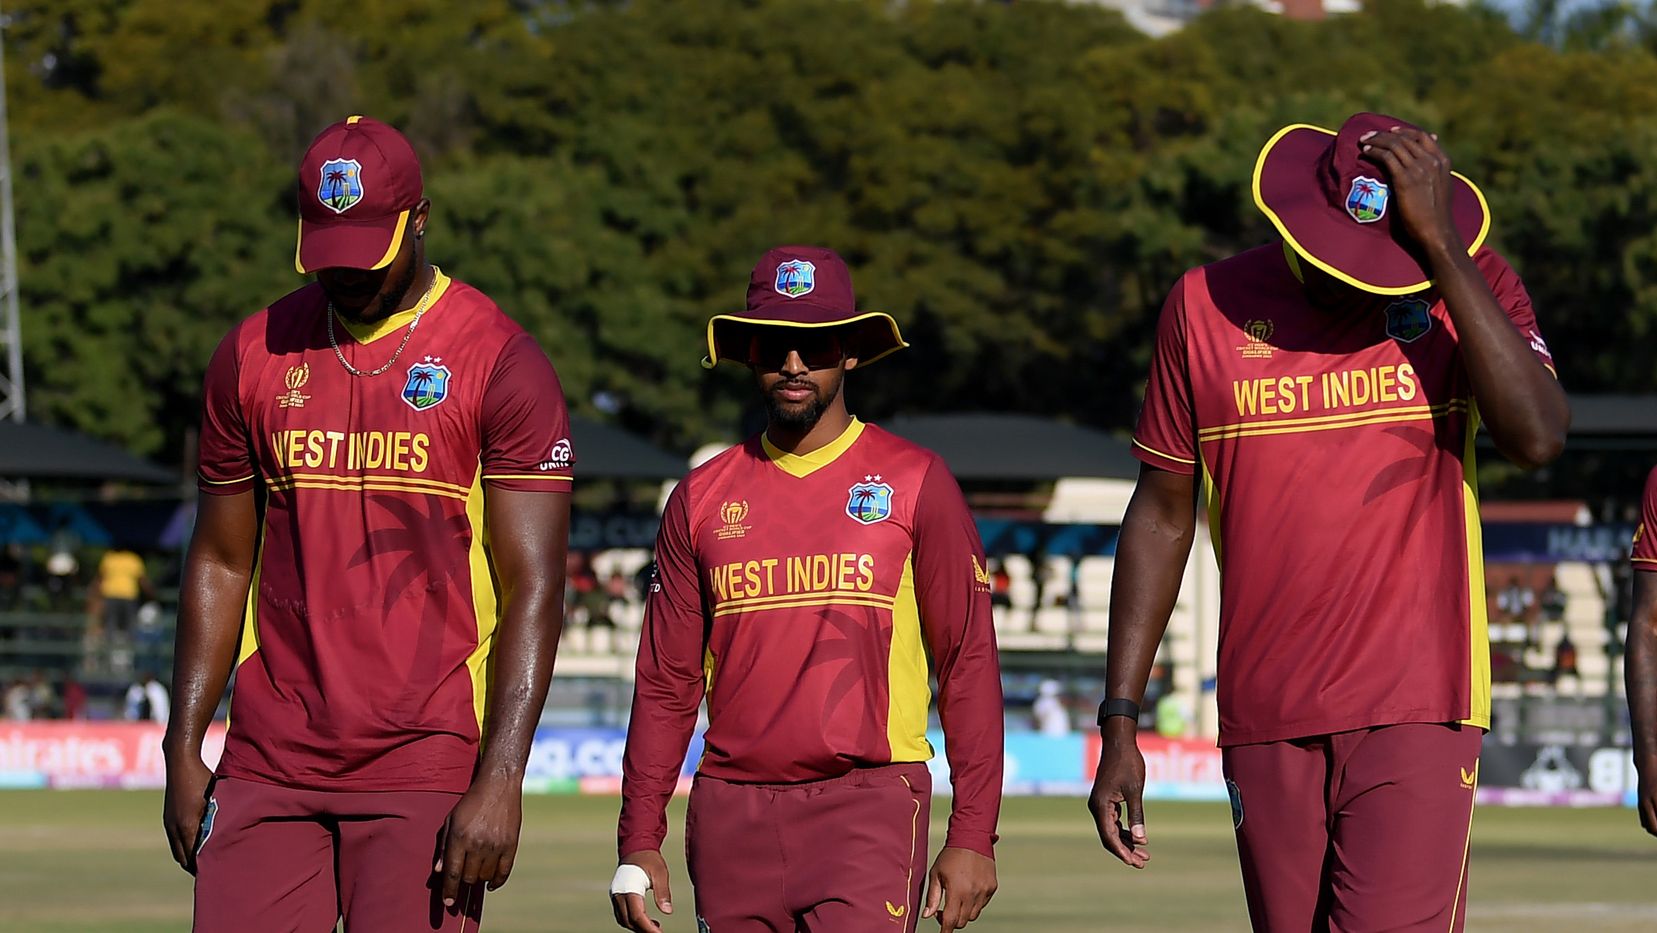 West Indies players walk off the field after being defeated by Scotland.